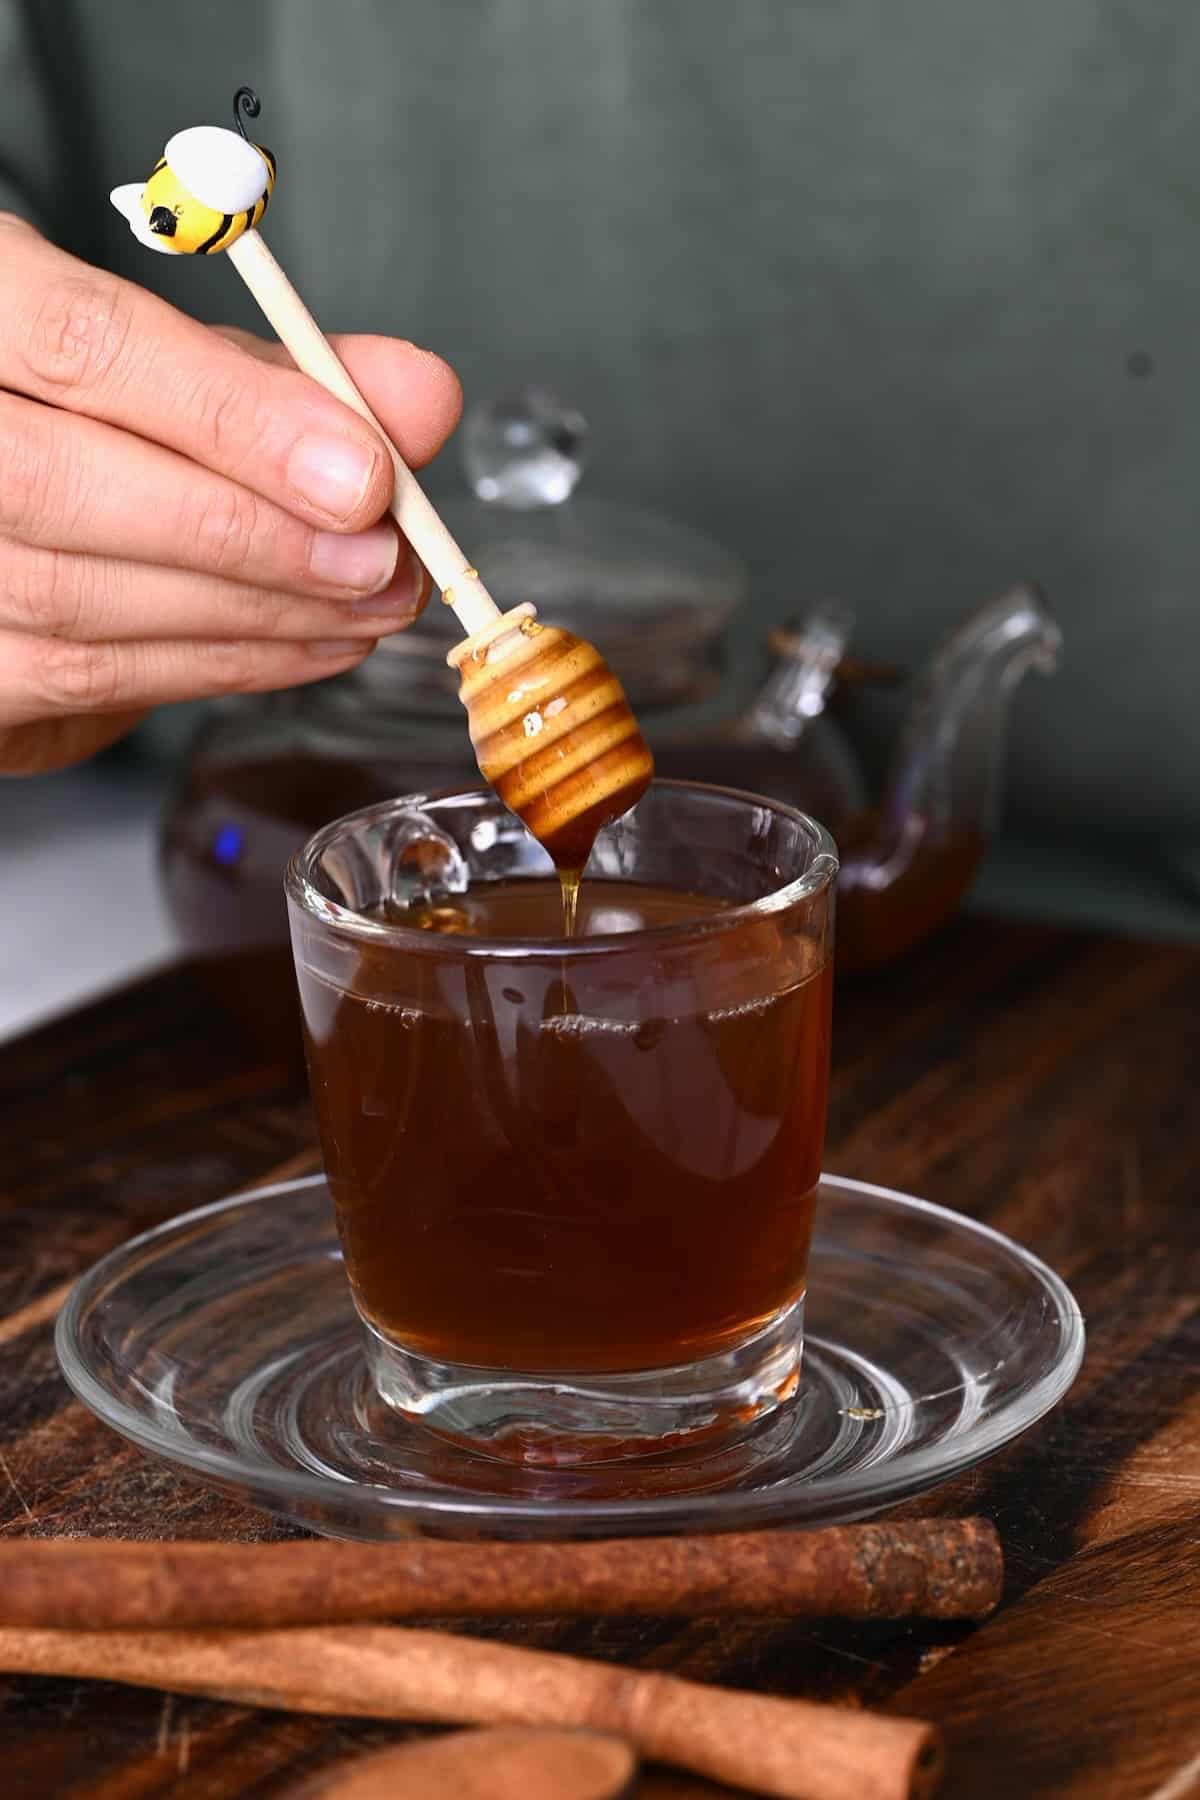 Adding a bit of honey to a glass with tea